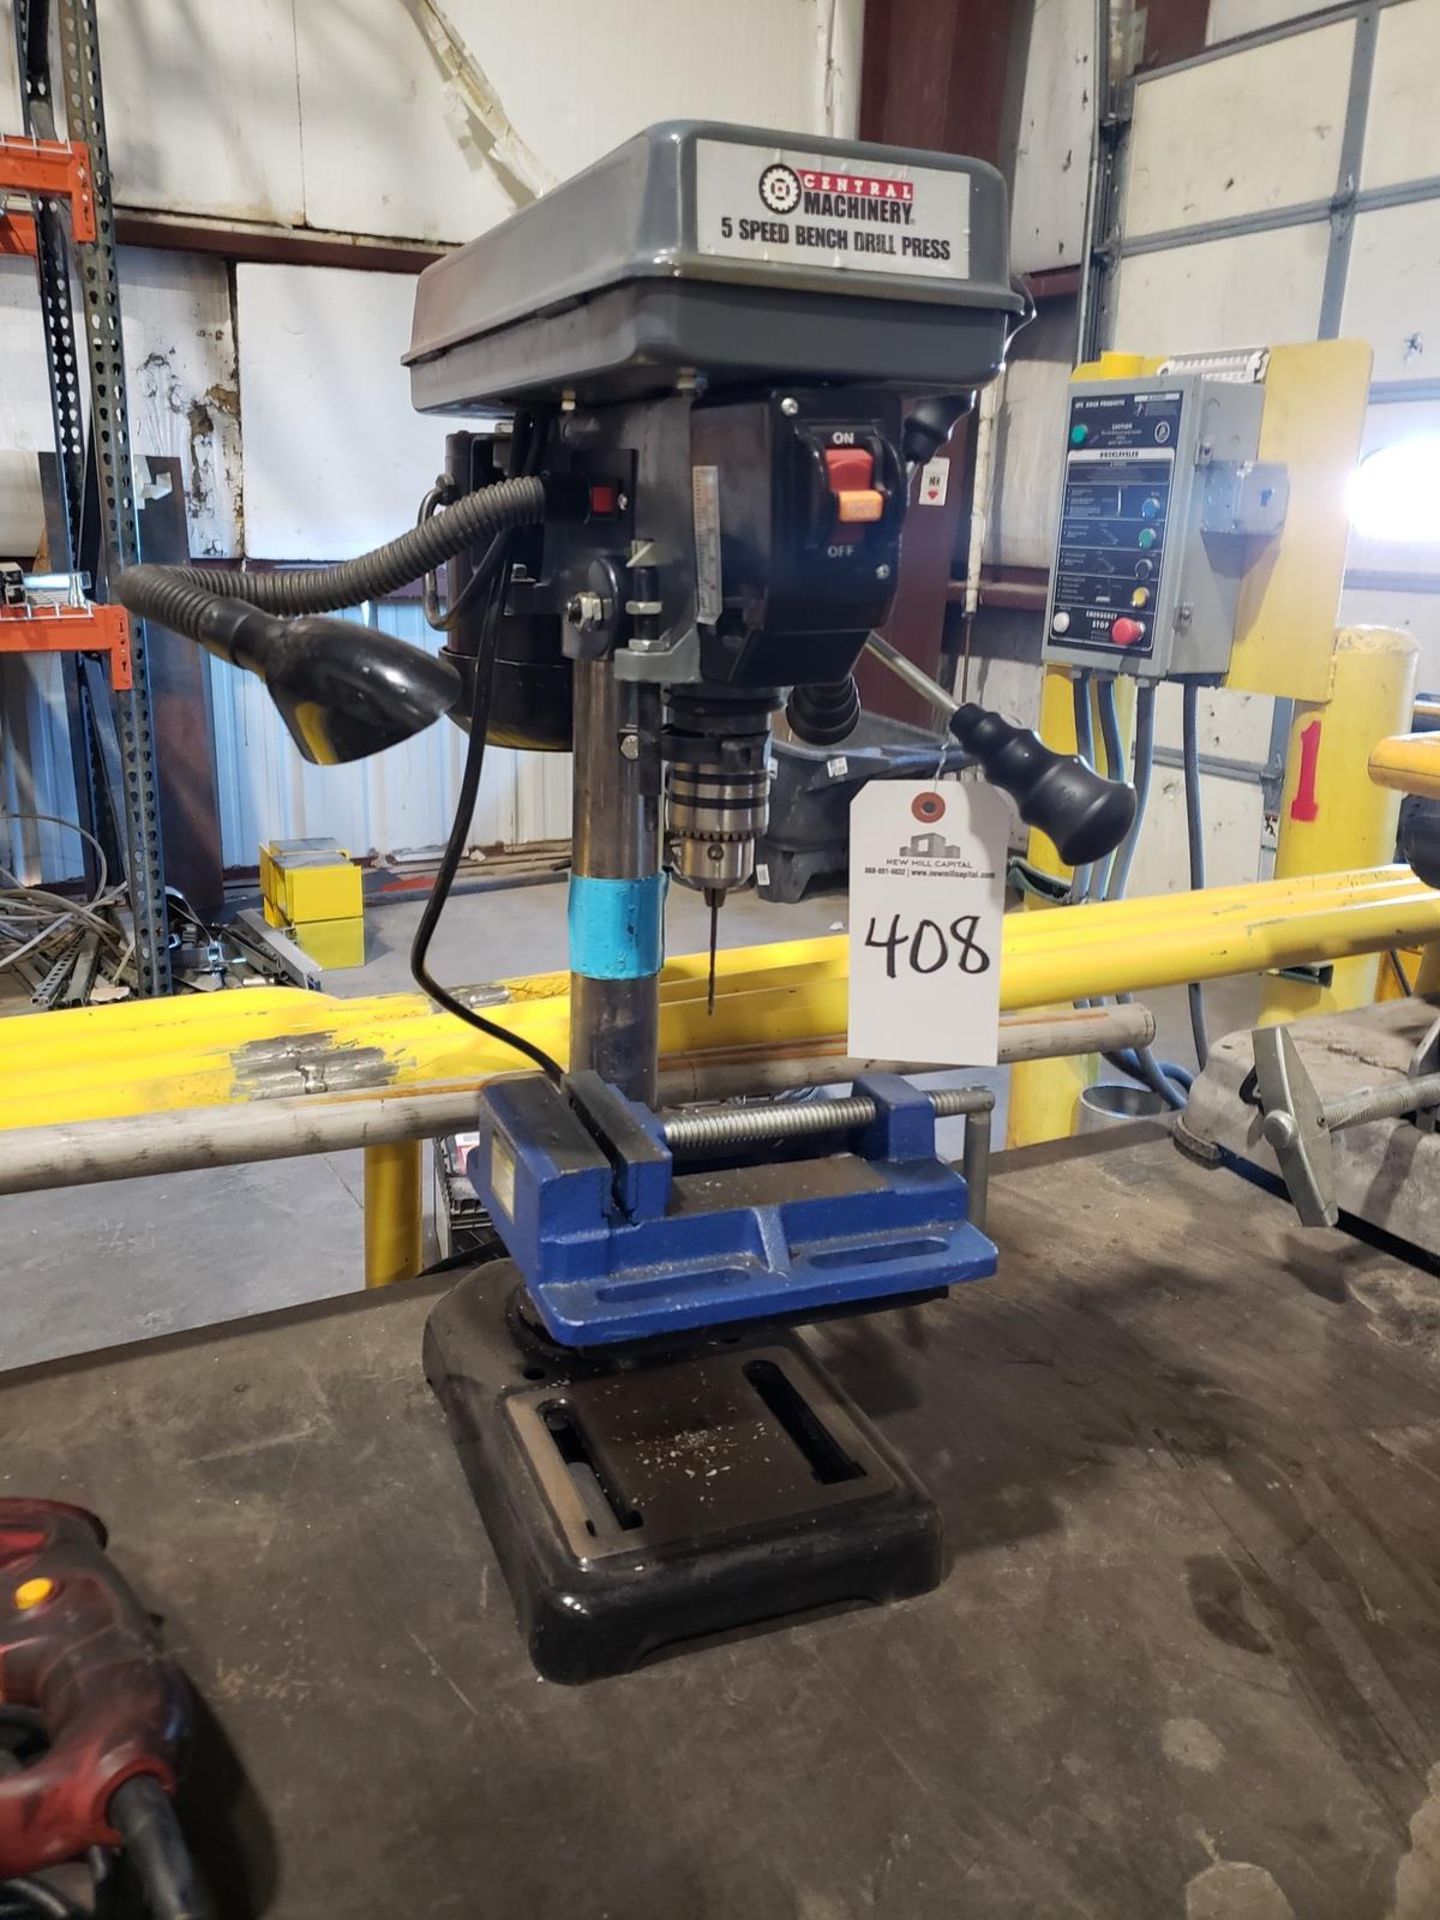 Central Machinery Table Top Drill Press | Rig Fee $50